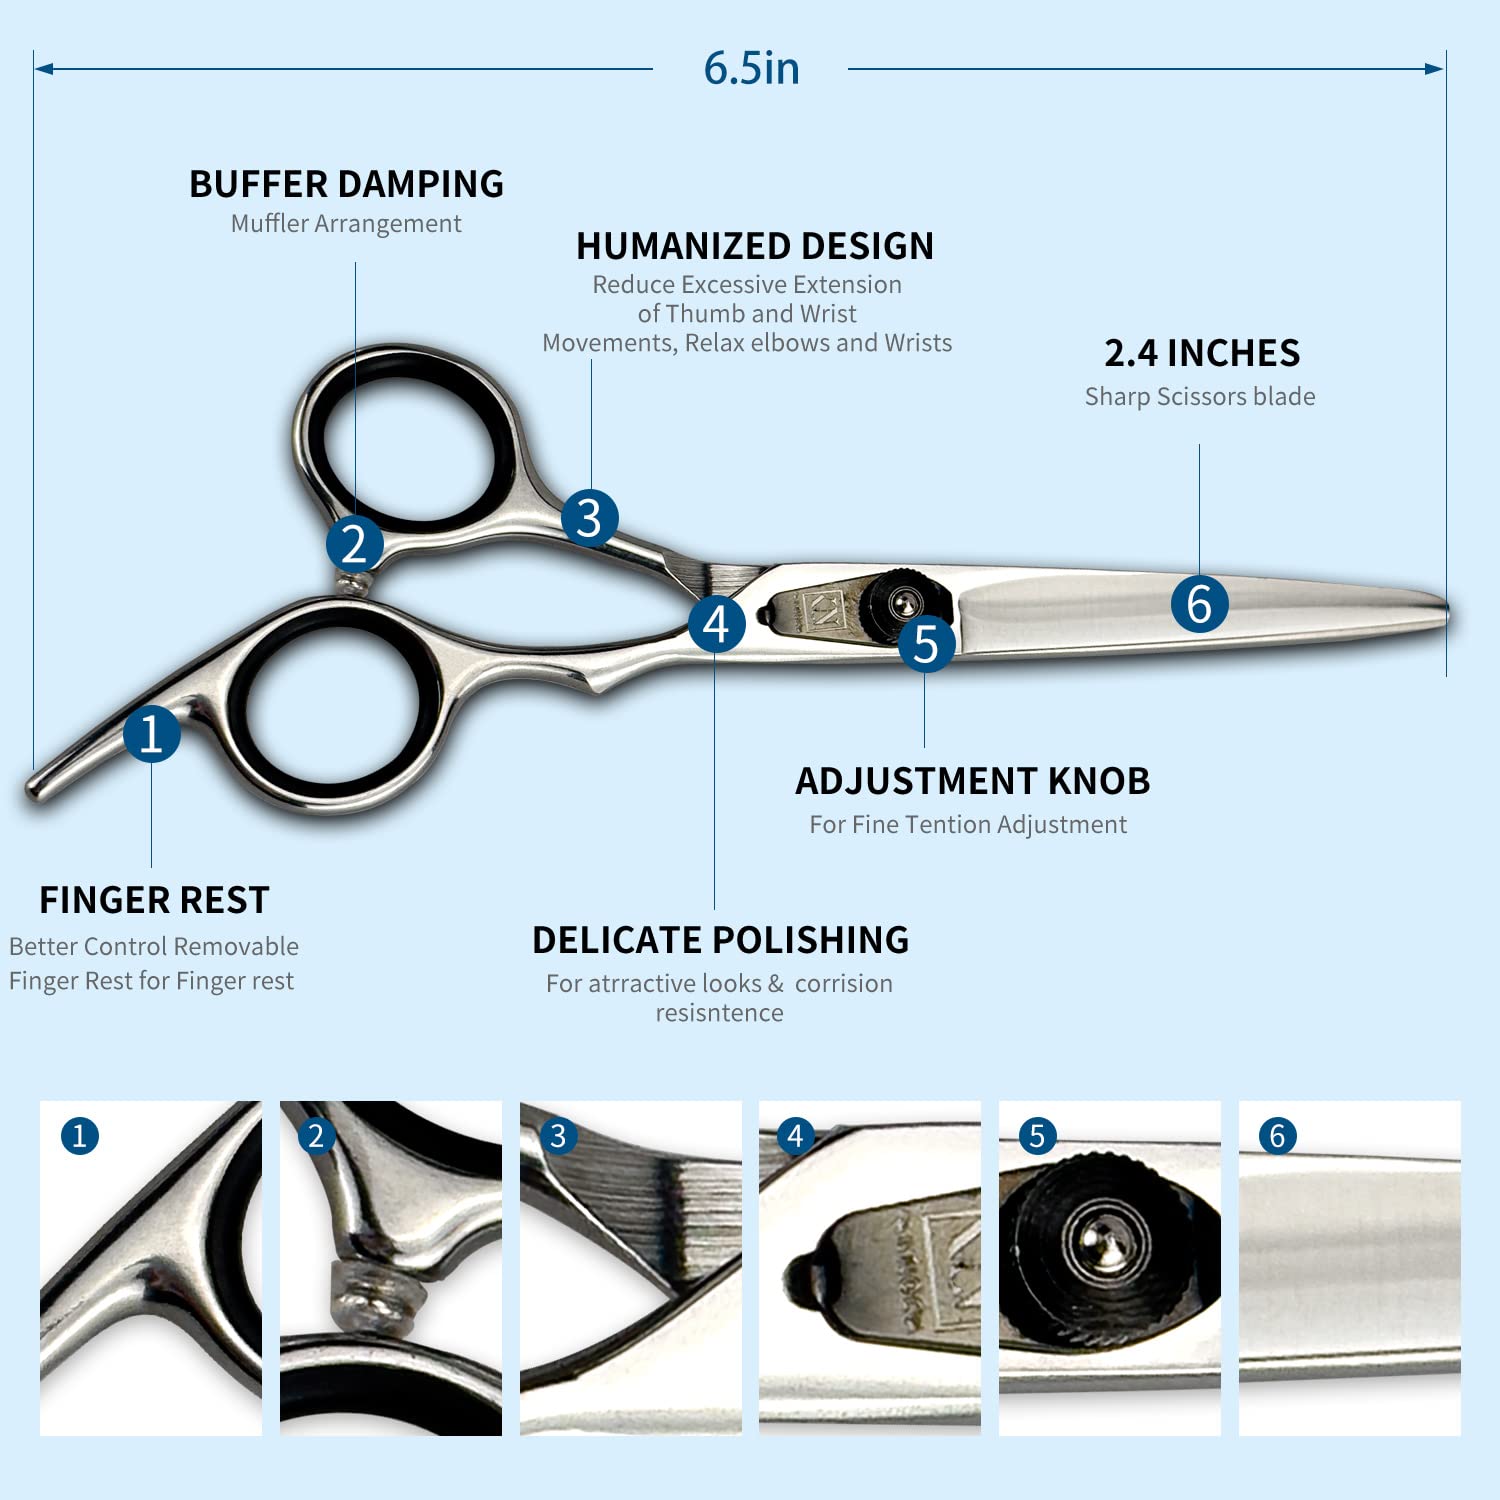 Hair Scissors Professional - 6.5 Inch Razor Edge Barber Scissors for Precision Cutting and Effortless Styling - Fine Adjustment Tension Screw - Salon and Home Use for Women, Men, and Kids (Silver)